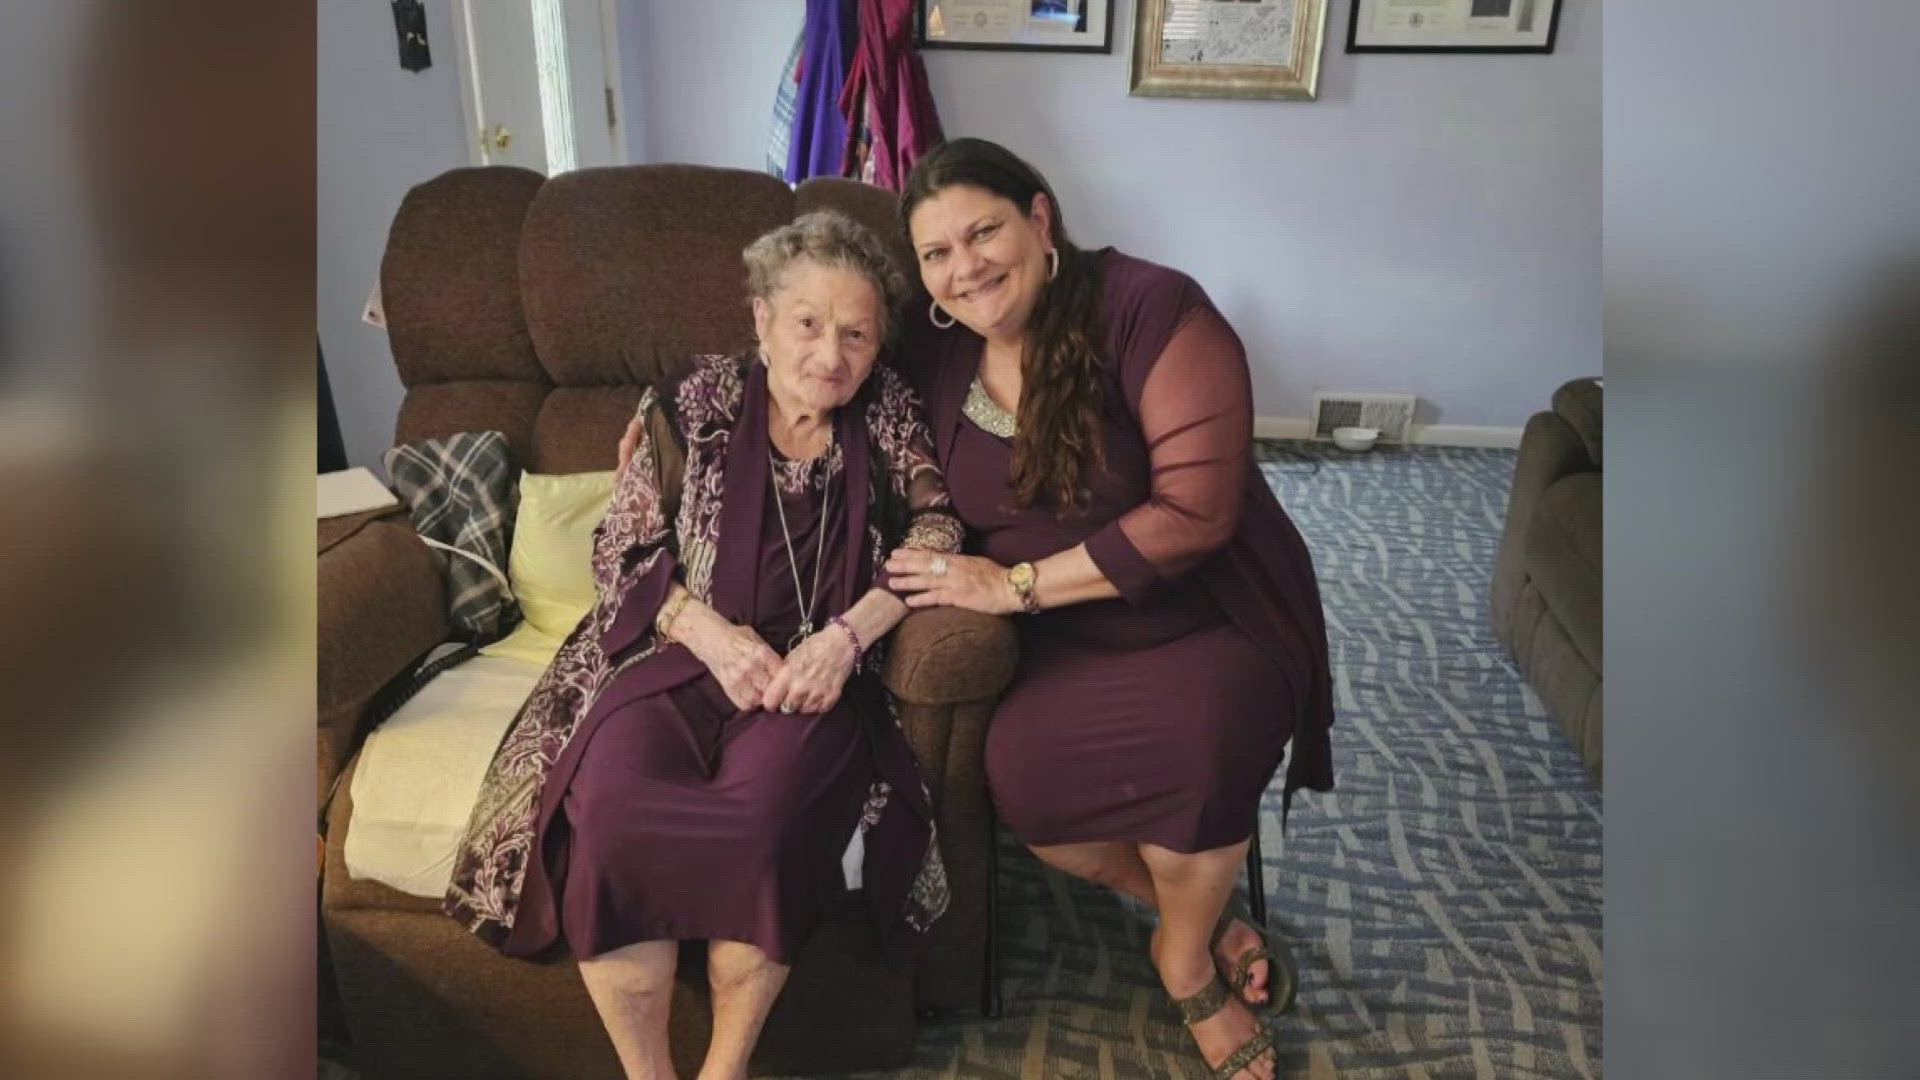 3News' Lindsay Buckingham shares the story of a family celebrating their 92-year-old mother/grandmother before Mother's Day.